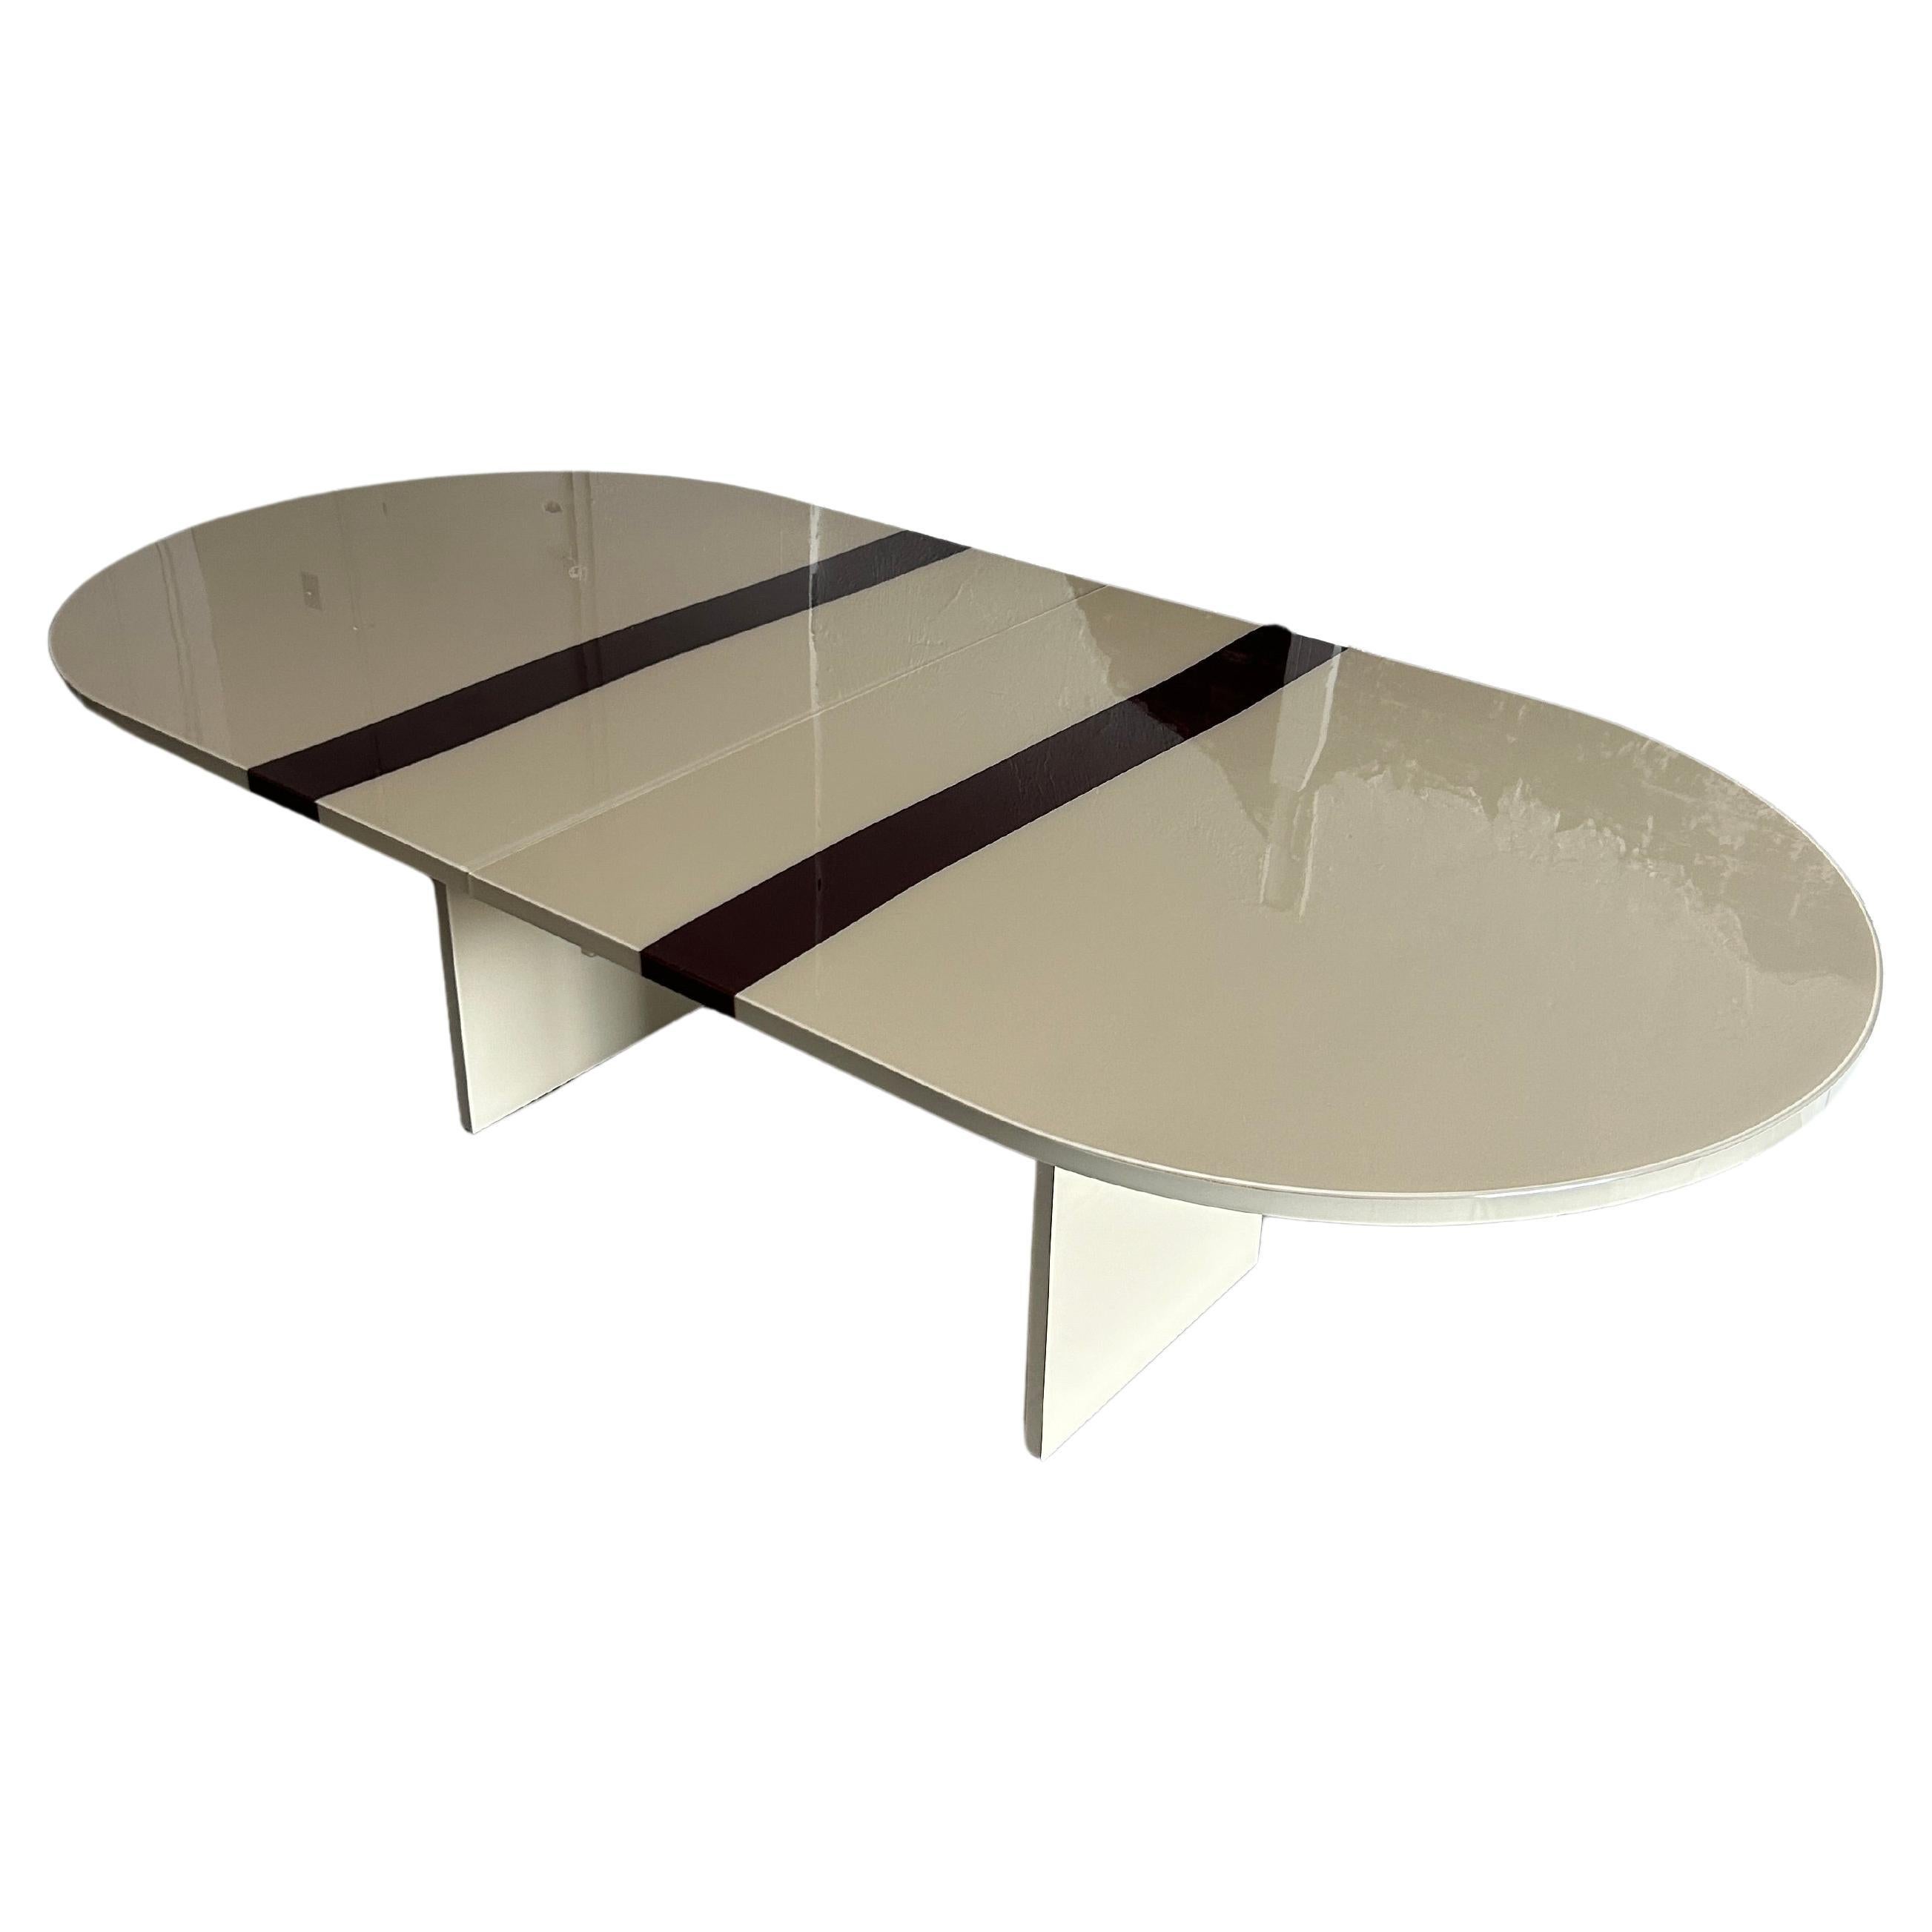 Post modern custom tan with maroon stripe dining table by Pace For Sale